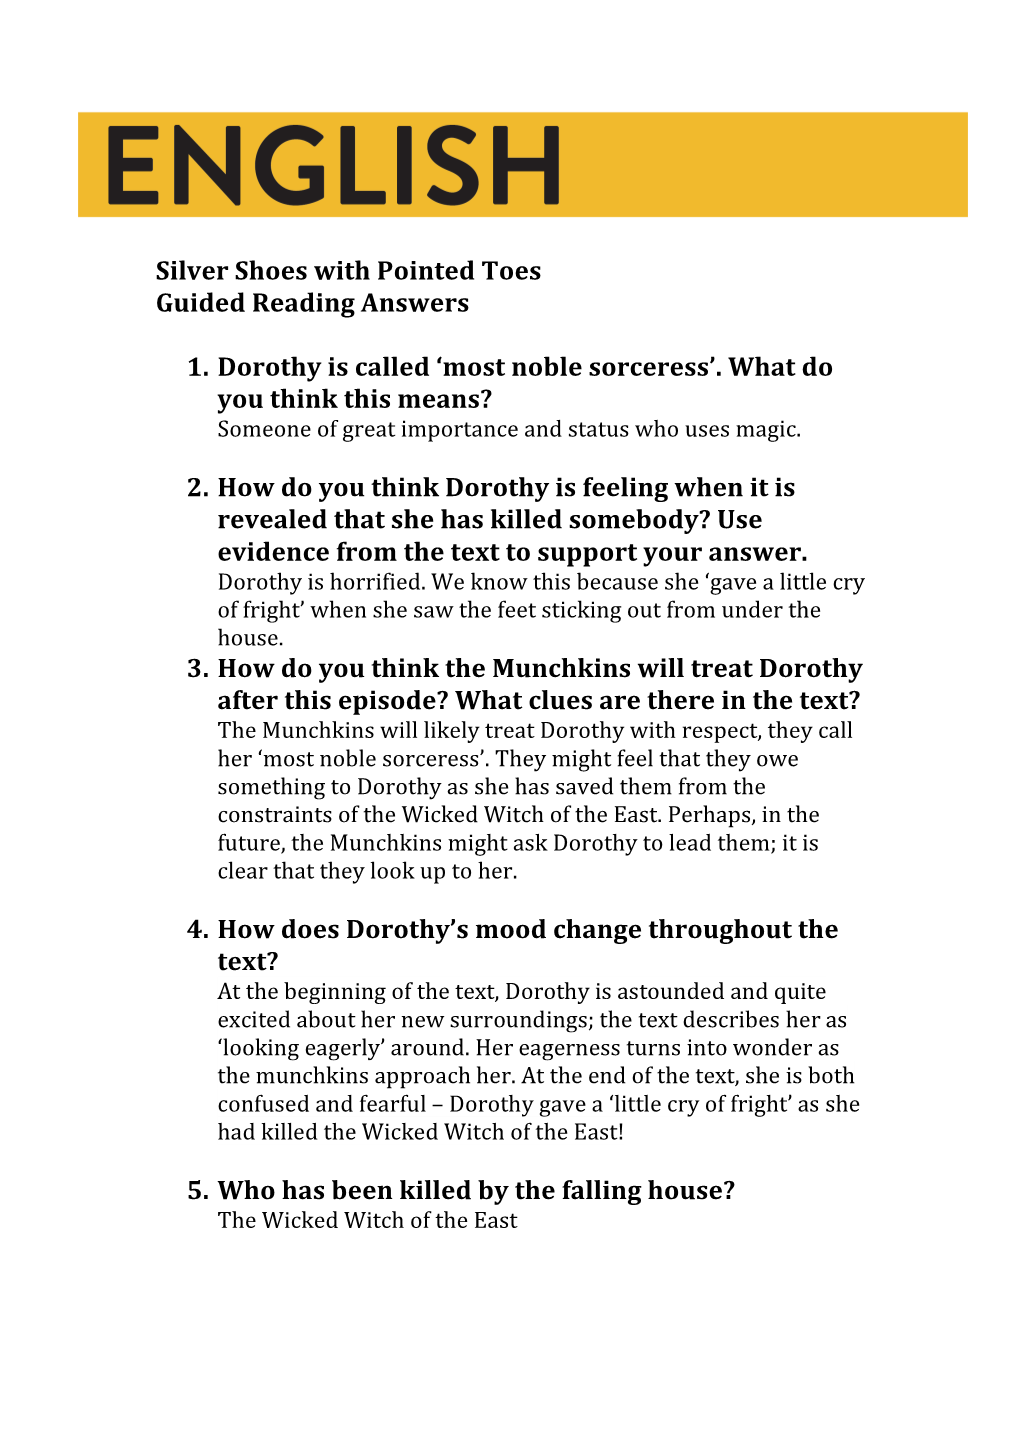 Silver Shoes with Pointed Toes Guided Reading Answers 1